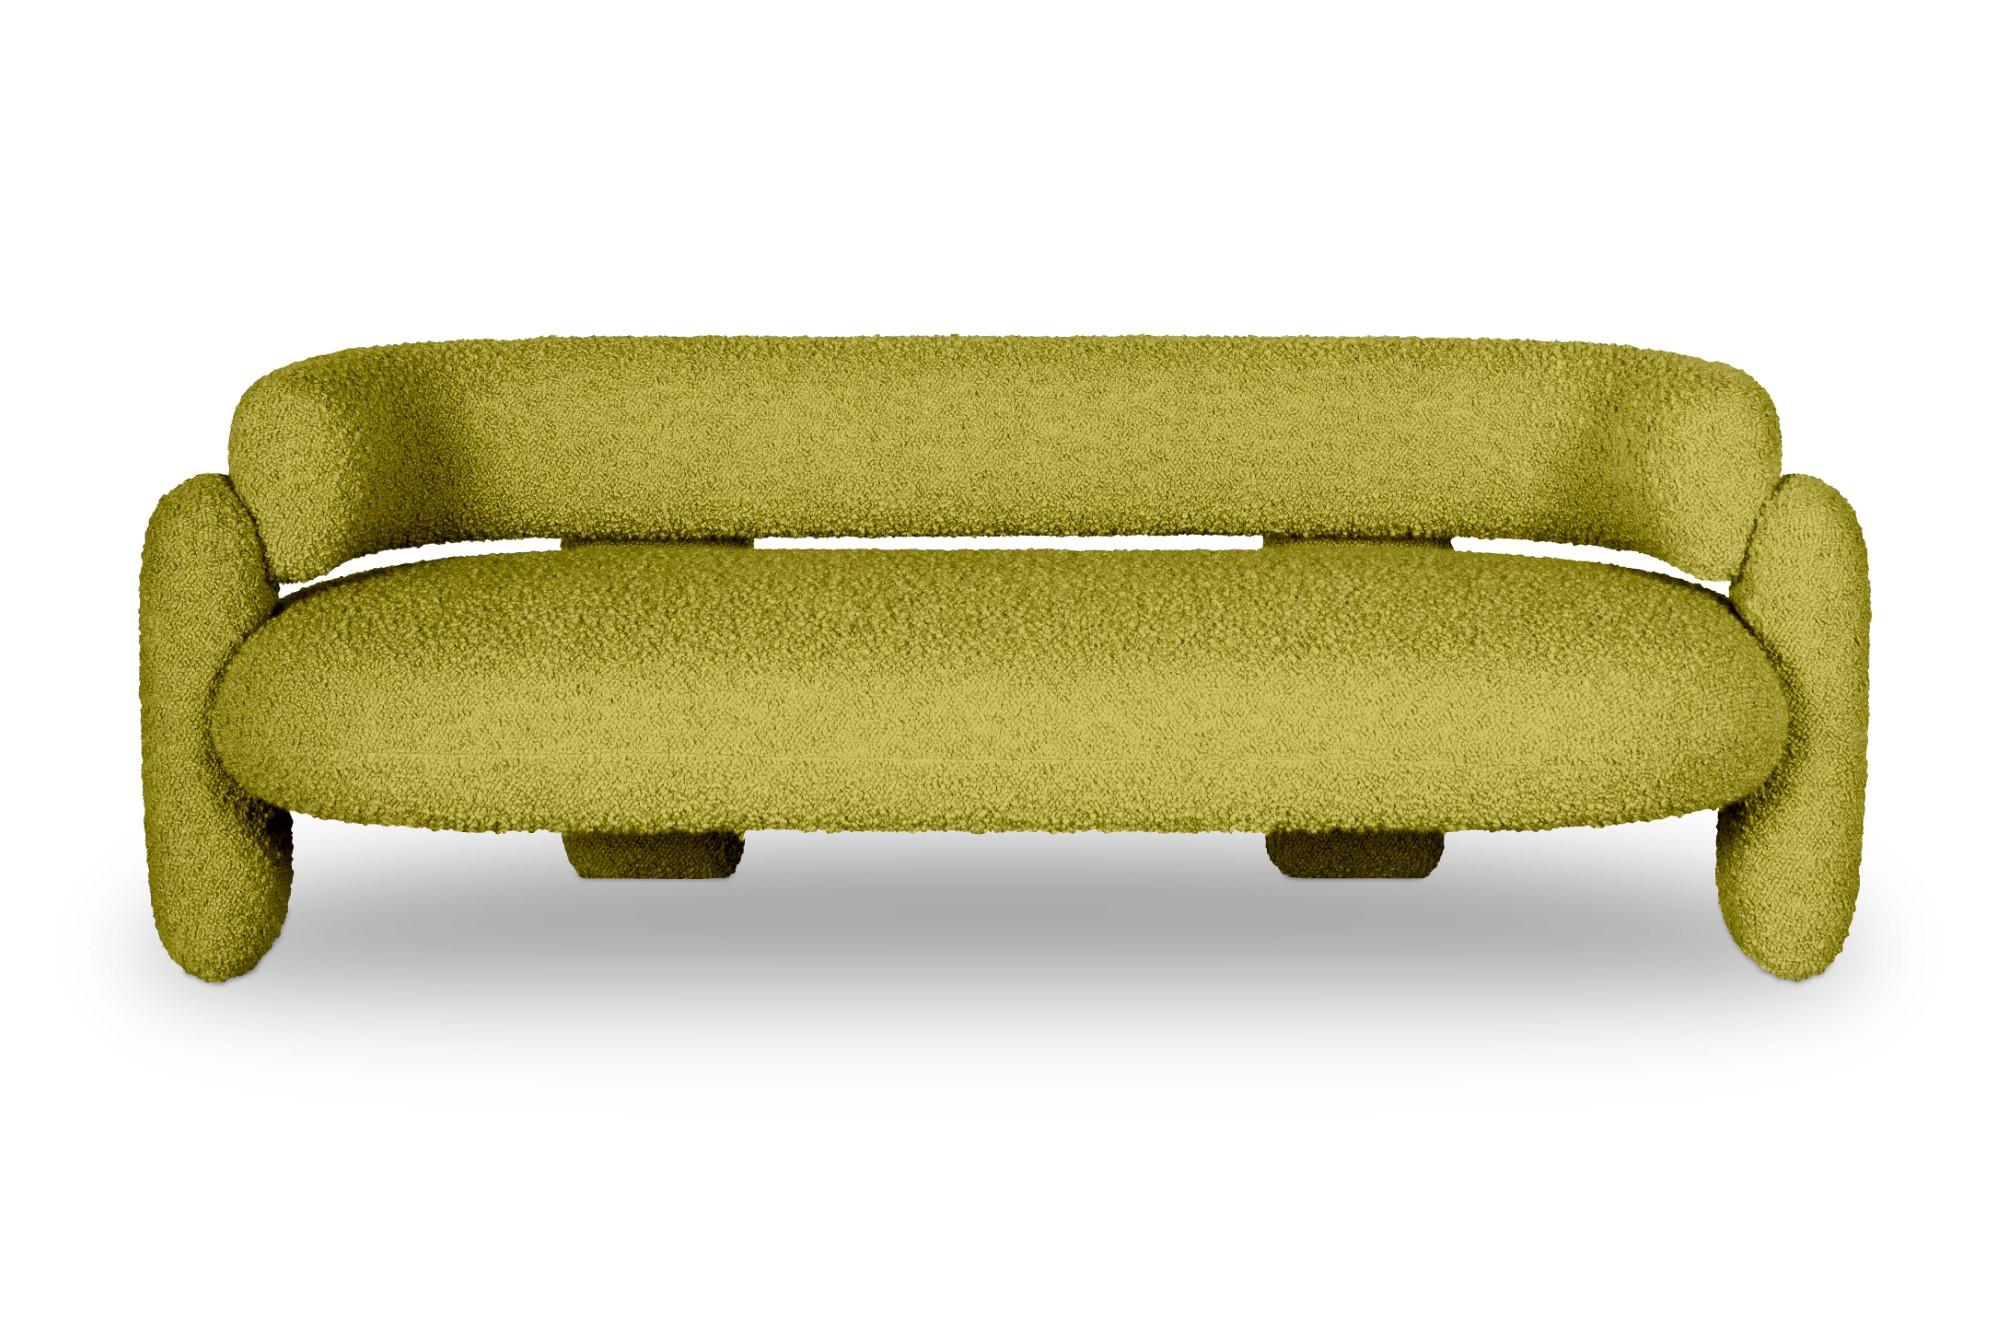 Embrace cormo acacia sofa by Royal Stranger.
Dimensions: W 200 x H 70 x D 90 cm. Seat Height 47 cm.
Materials: Solid wood frame, foam, upholstery.
Available in other Royal Stranger’s fabrics and in COM. 

Embrace sofa is fond of neat lines. It